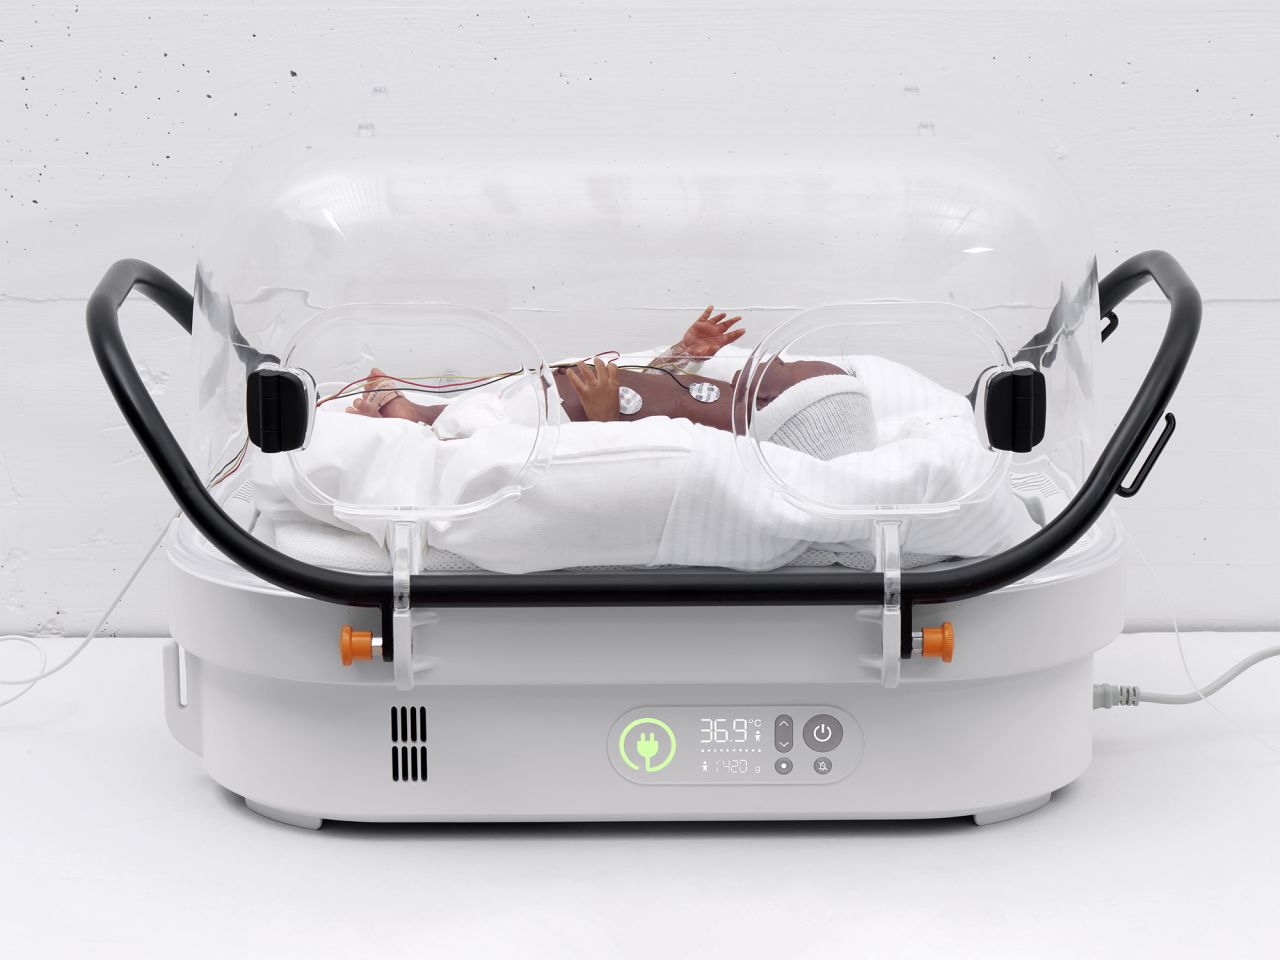 <strong>A portable incubator to save children from hypothermia:</strong> "Robust Nest" is an incubator designed for sub-Saharan Africa. It is suited to transporting patients in vehicles and can withstand frequent power cuts by using a heat-storing battery. It was developed by Fabien Roy, a student at ECAL in Switzerland, in collaboration with EPFL, a Swiss research center. 